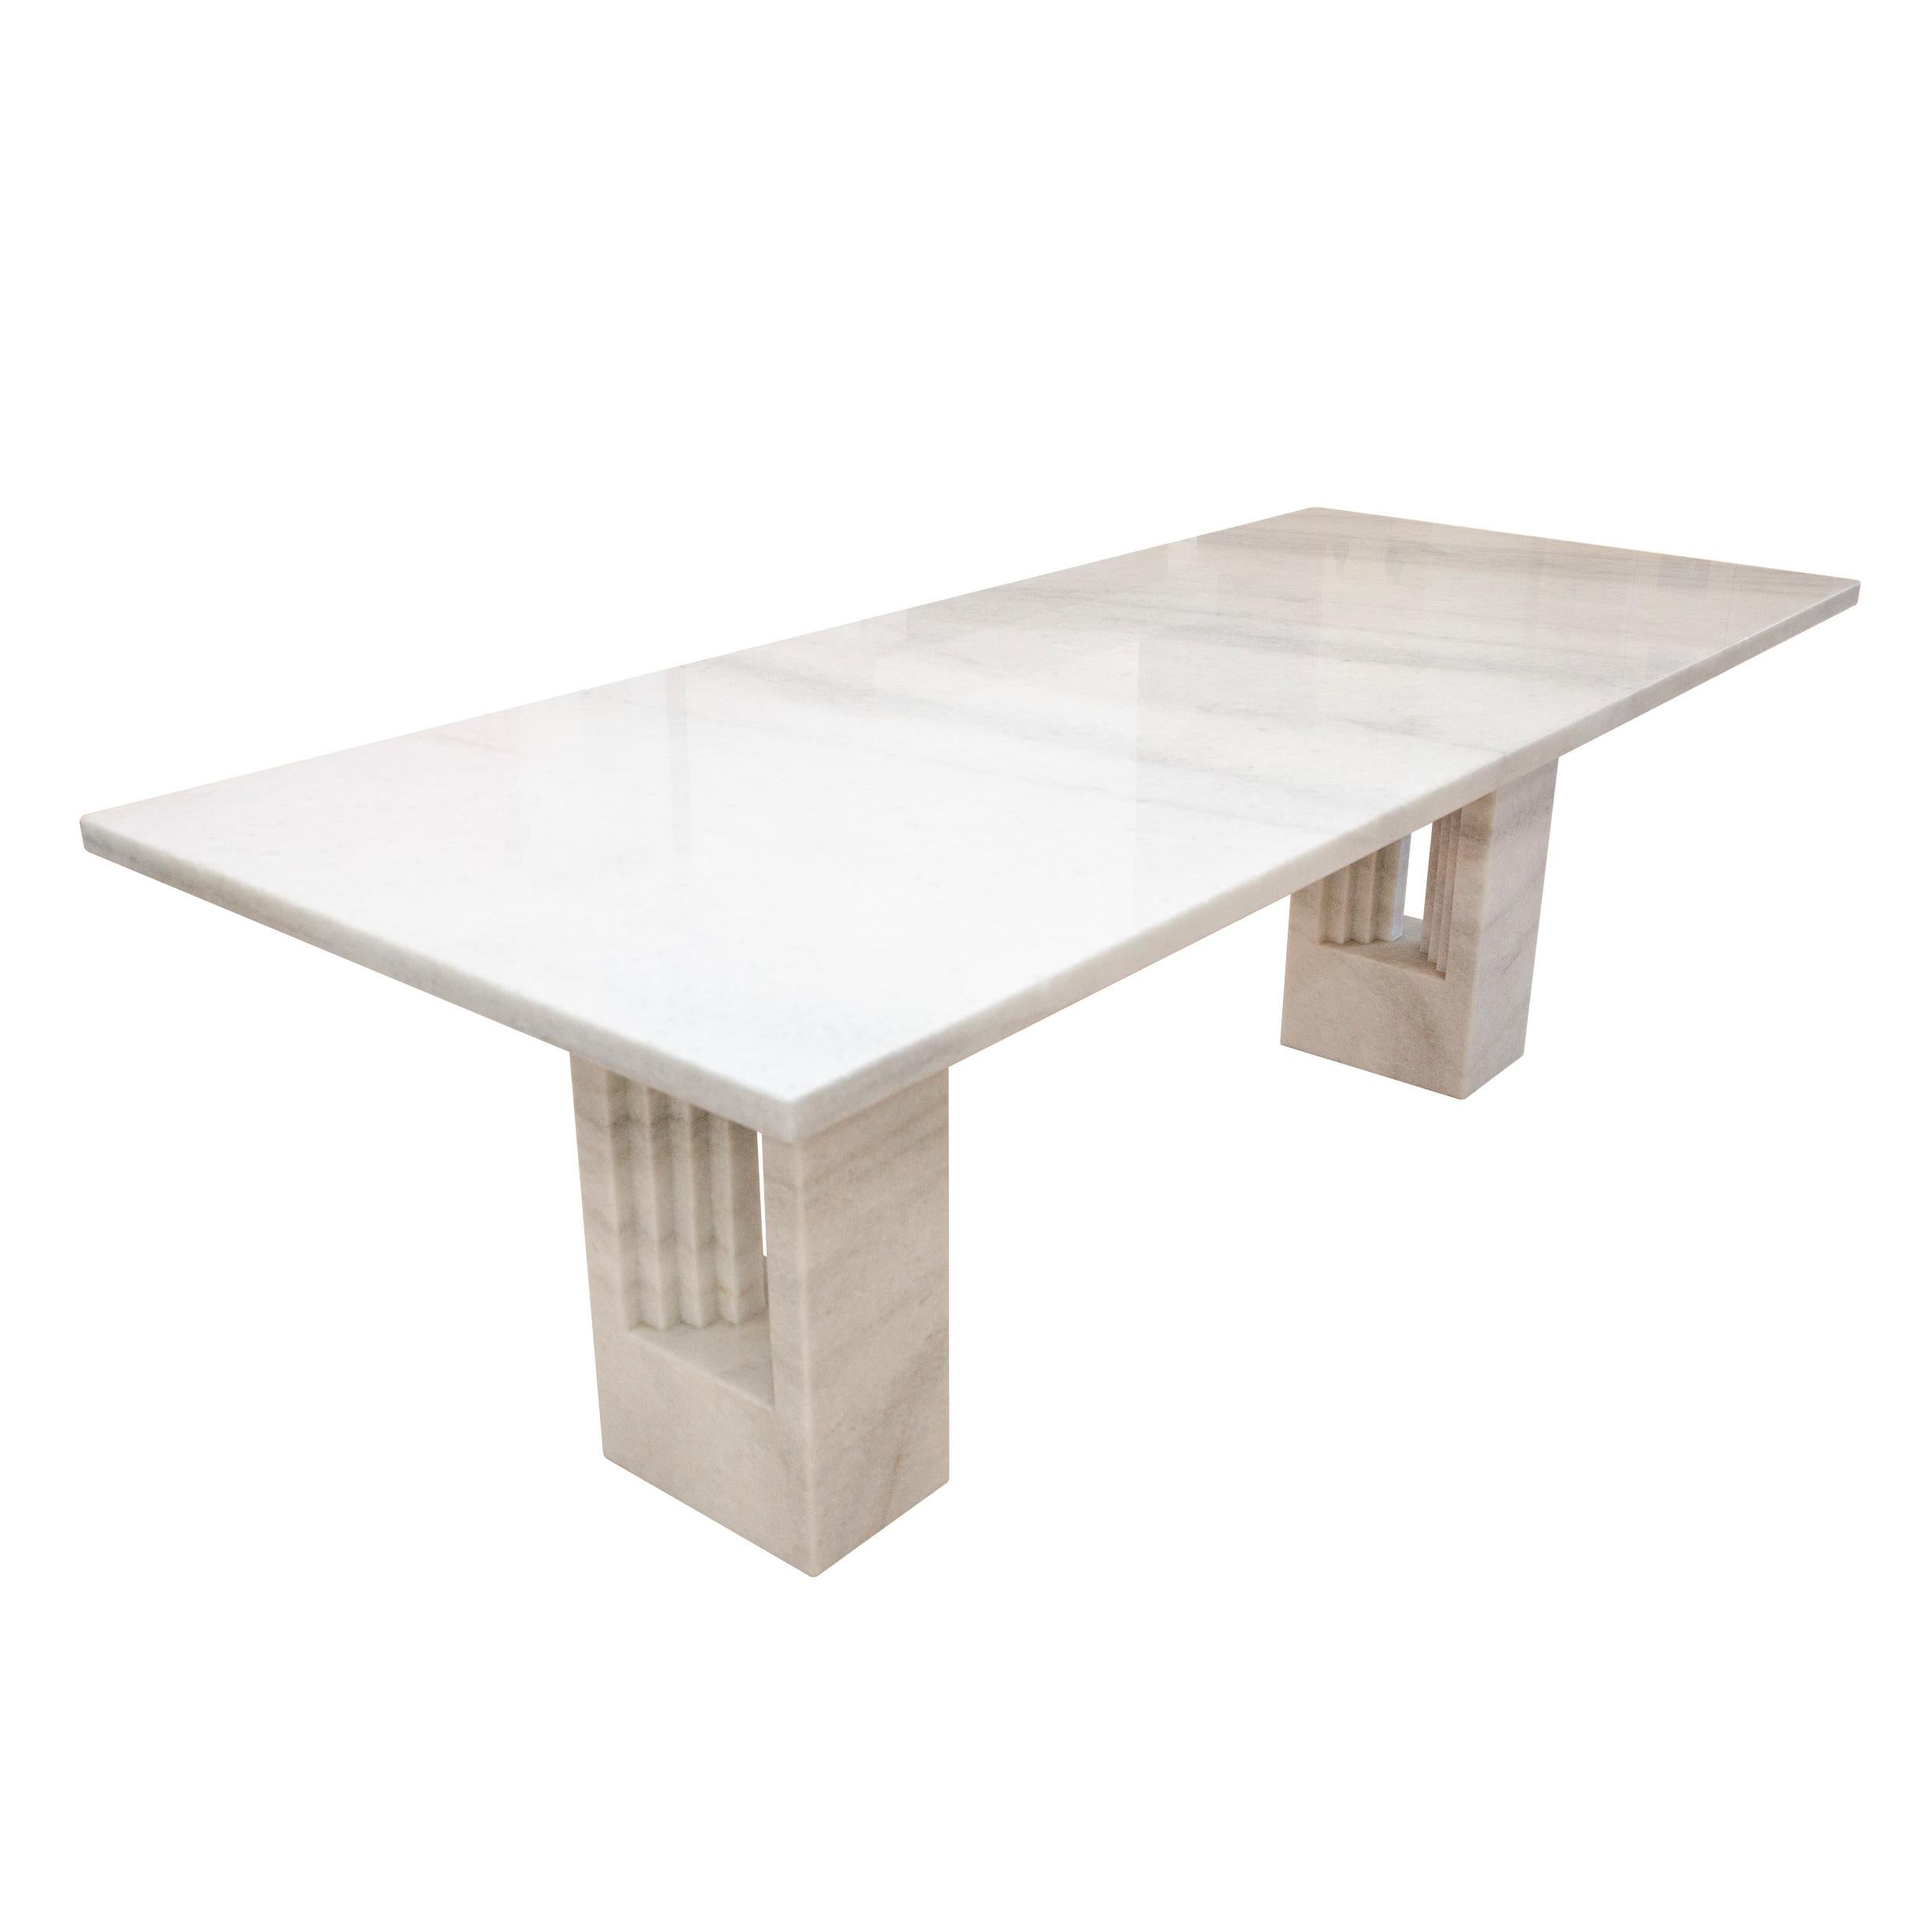 “Delfi” dining table, designed by Carlo Scarpa and Marcel Breuer and produced by the Italian manufacturer Studio Simon in 1969.

Made of white Naxos marble.

Designed in 1969, the marble table was originally made of three pieces (its two feet